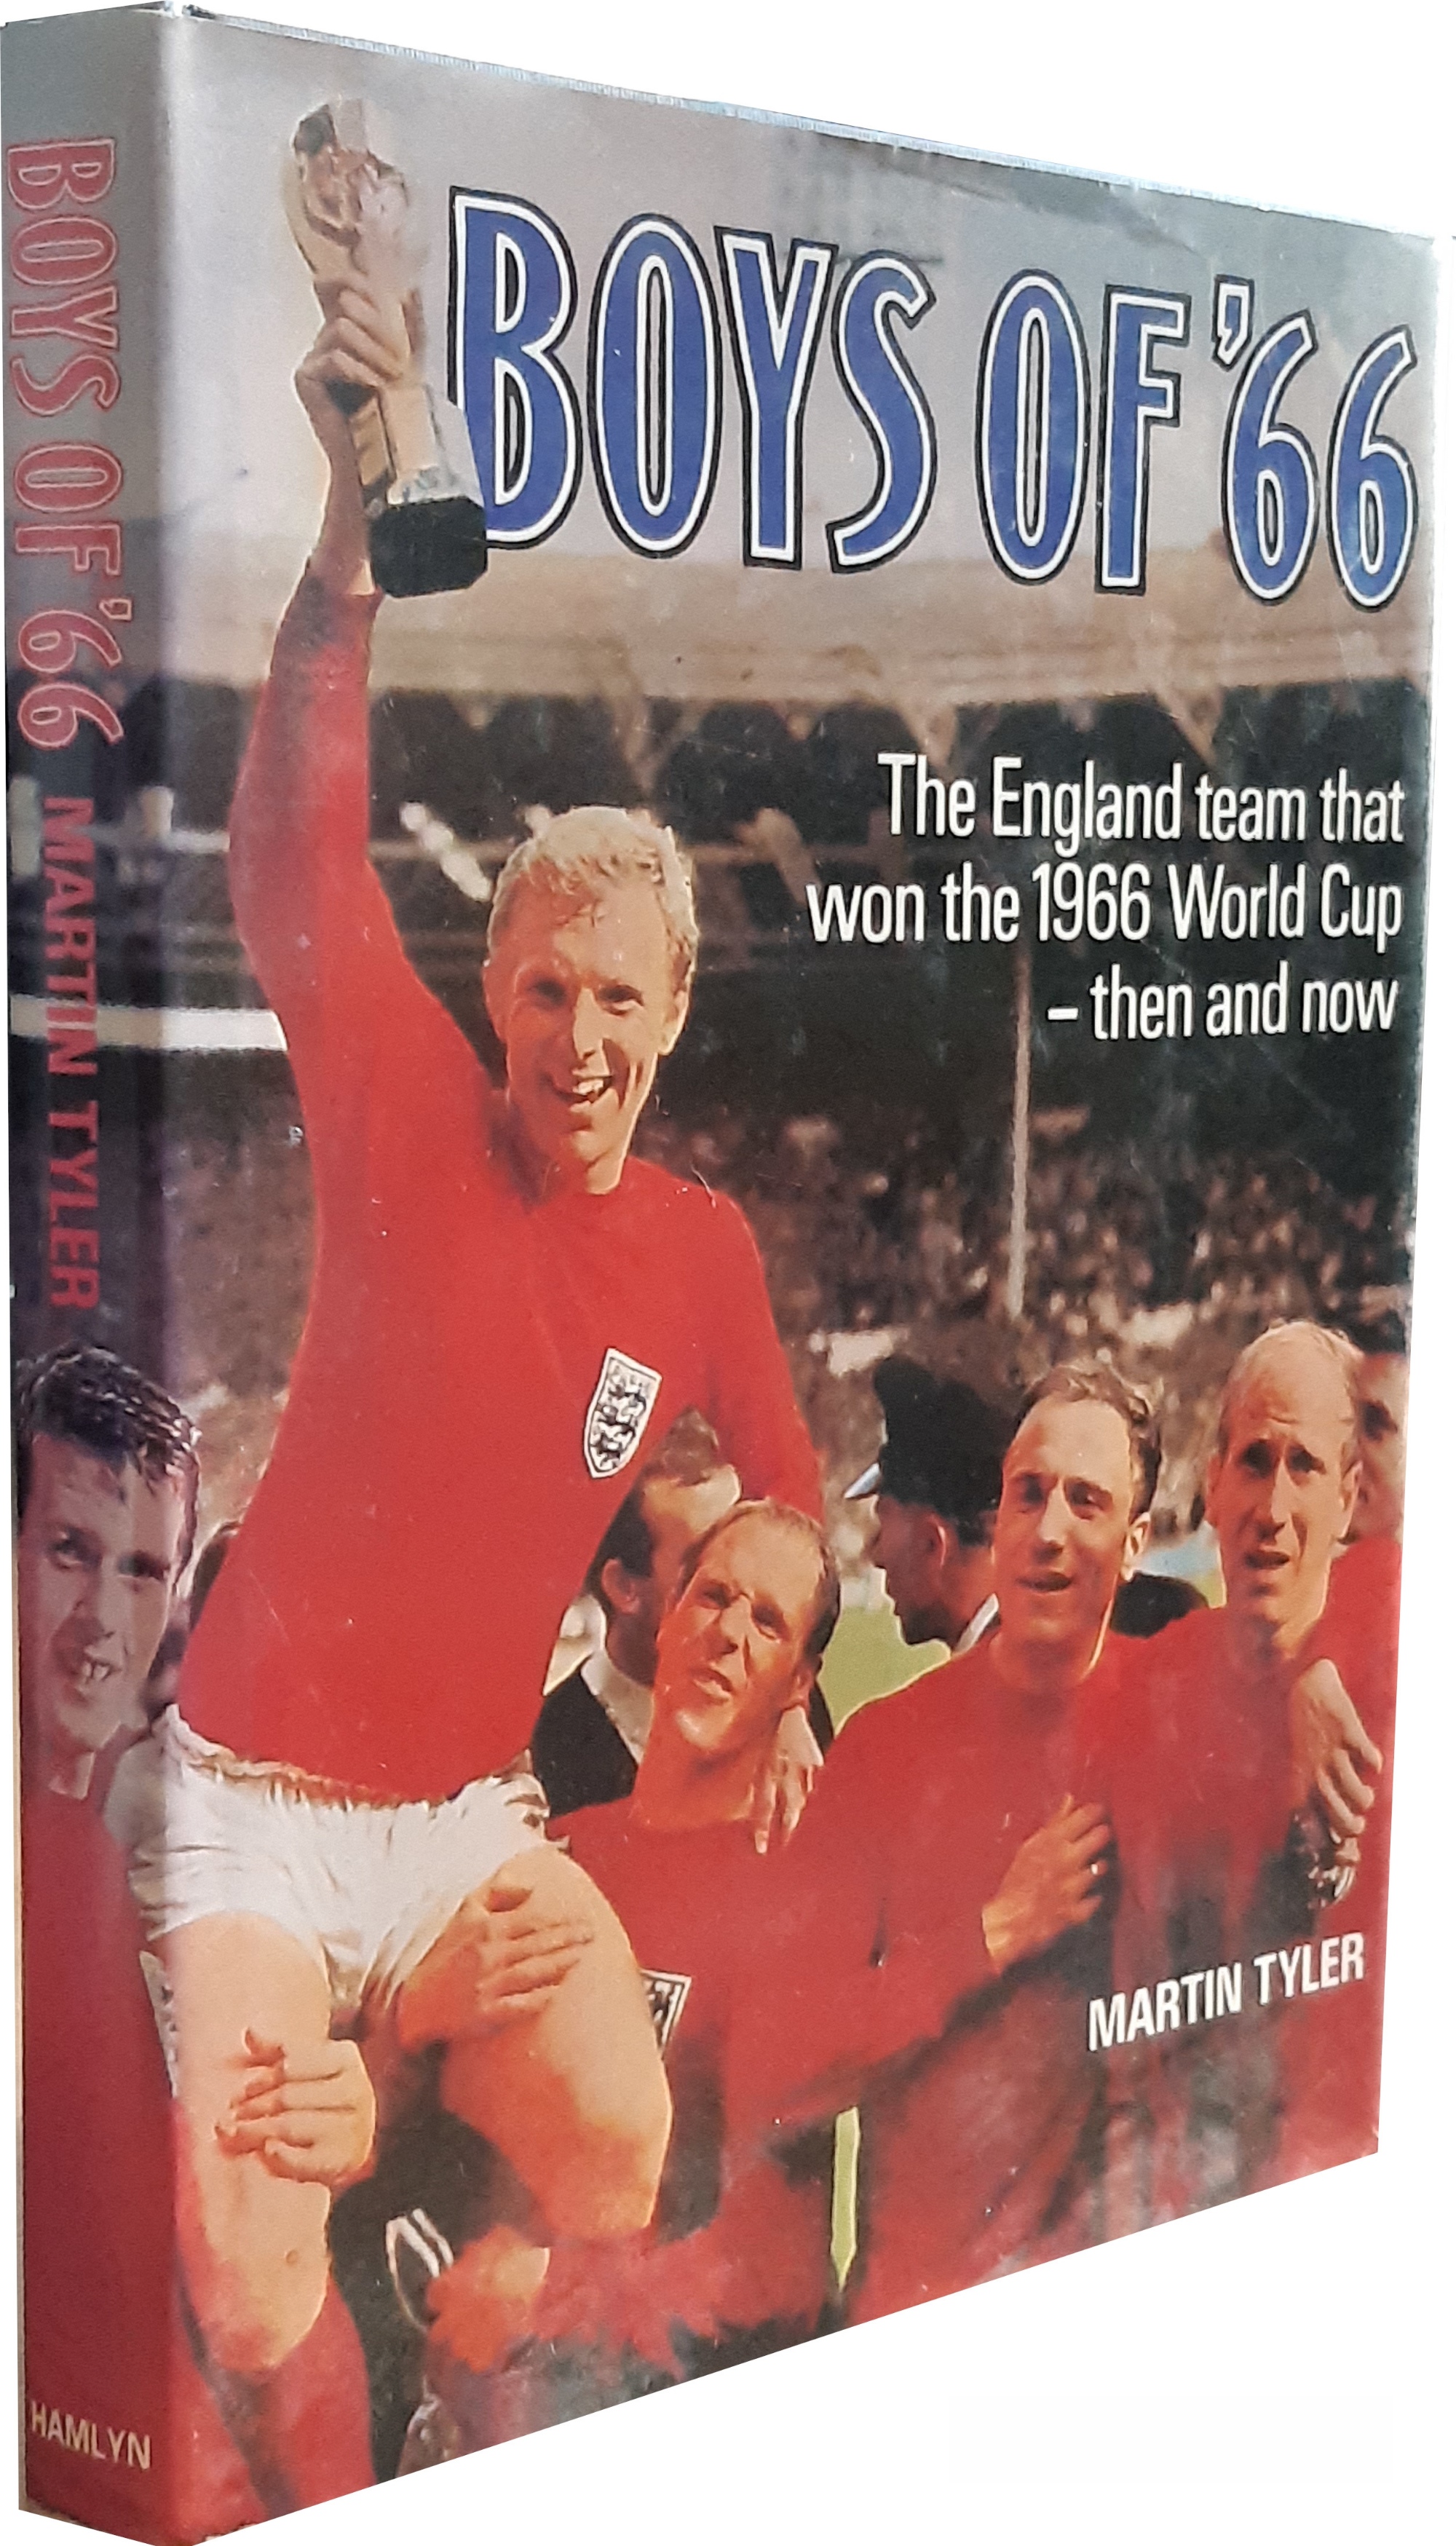 Tyler (Martin). Boys of '66 - The England team that won the 1966 World Cup – then and now, signed by